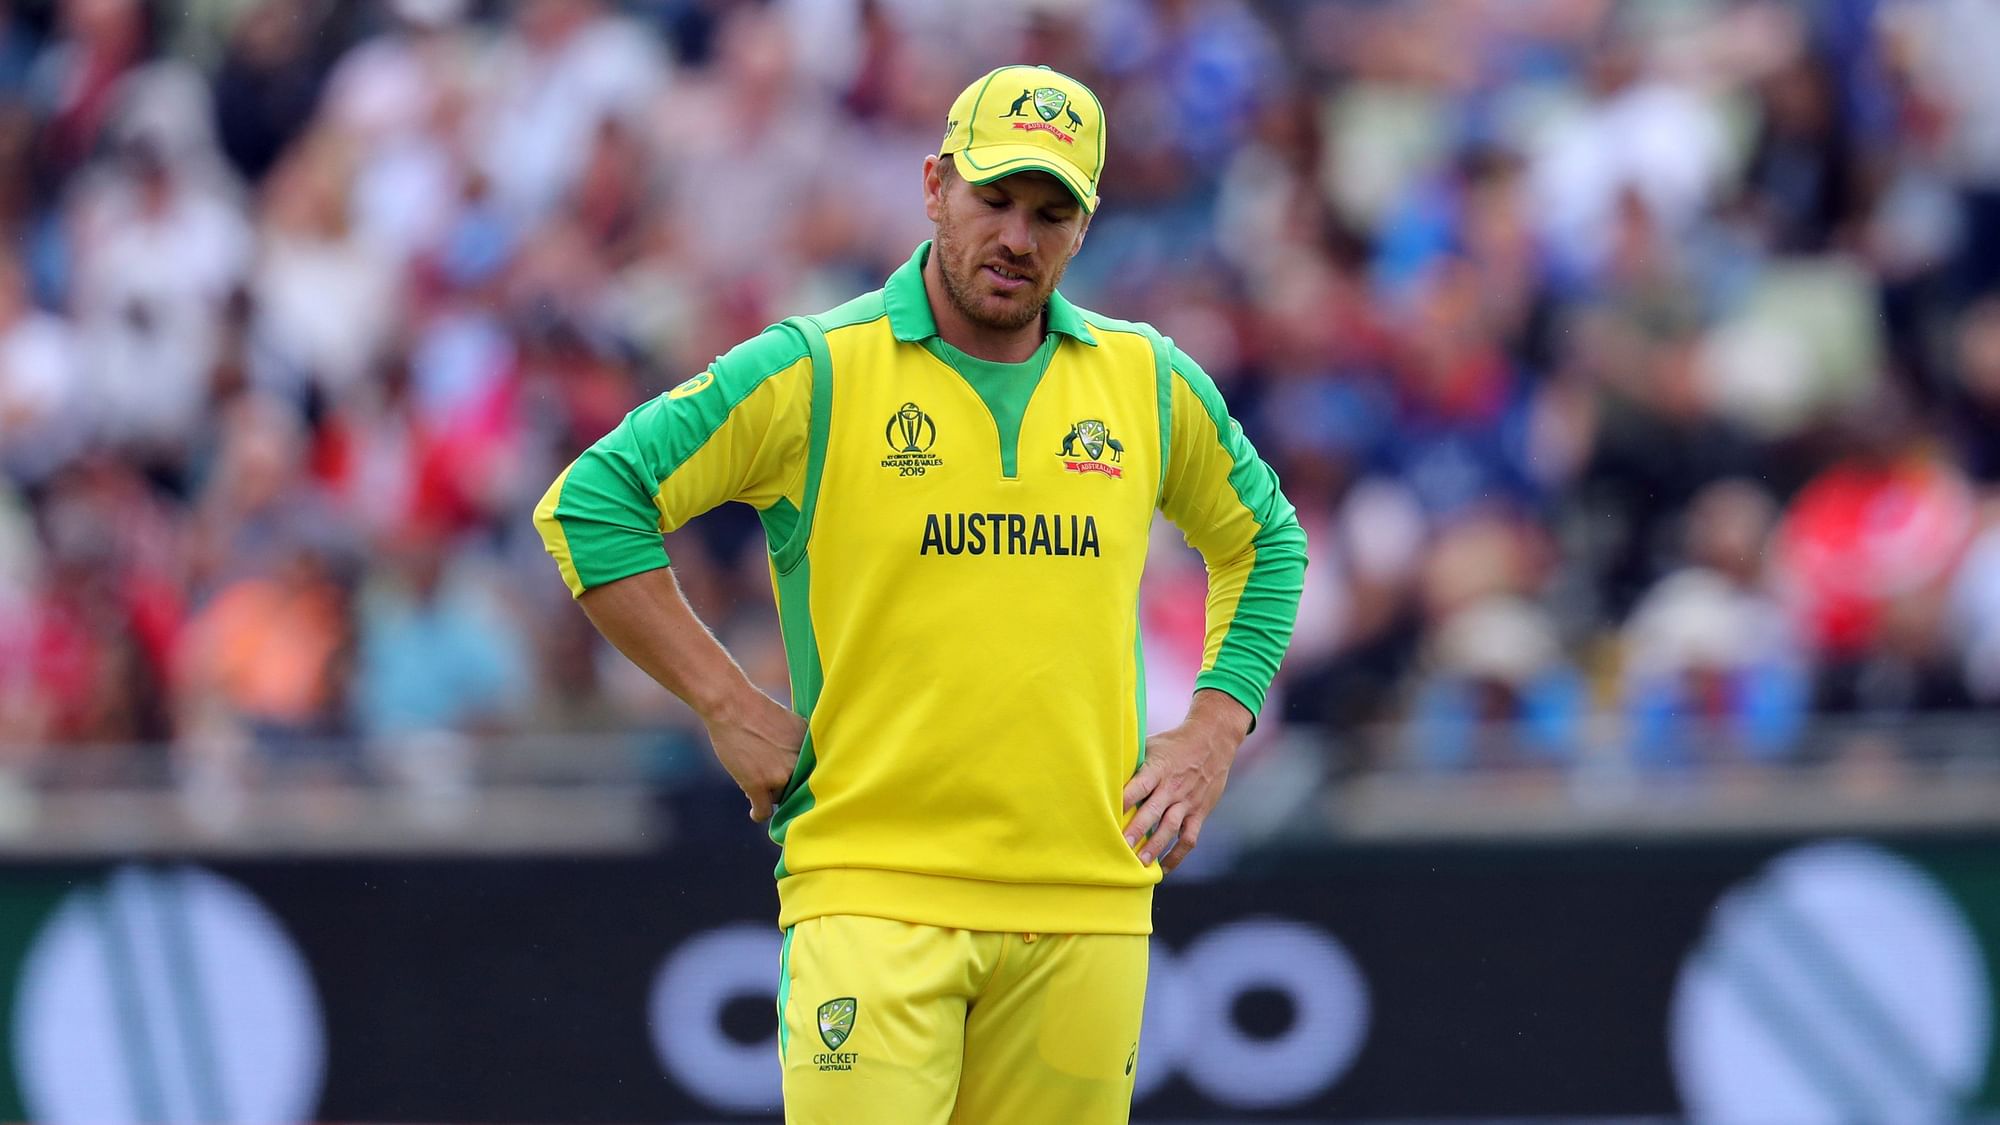 The T20 World Cup looks “unrealistic” amid the ongoing COVID-19 pandemic, says Cricket Australia (CA) chairman Earl Eddings.